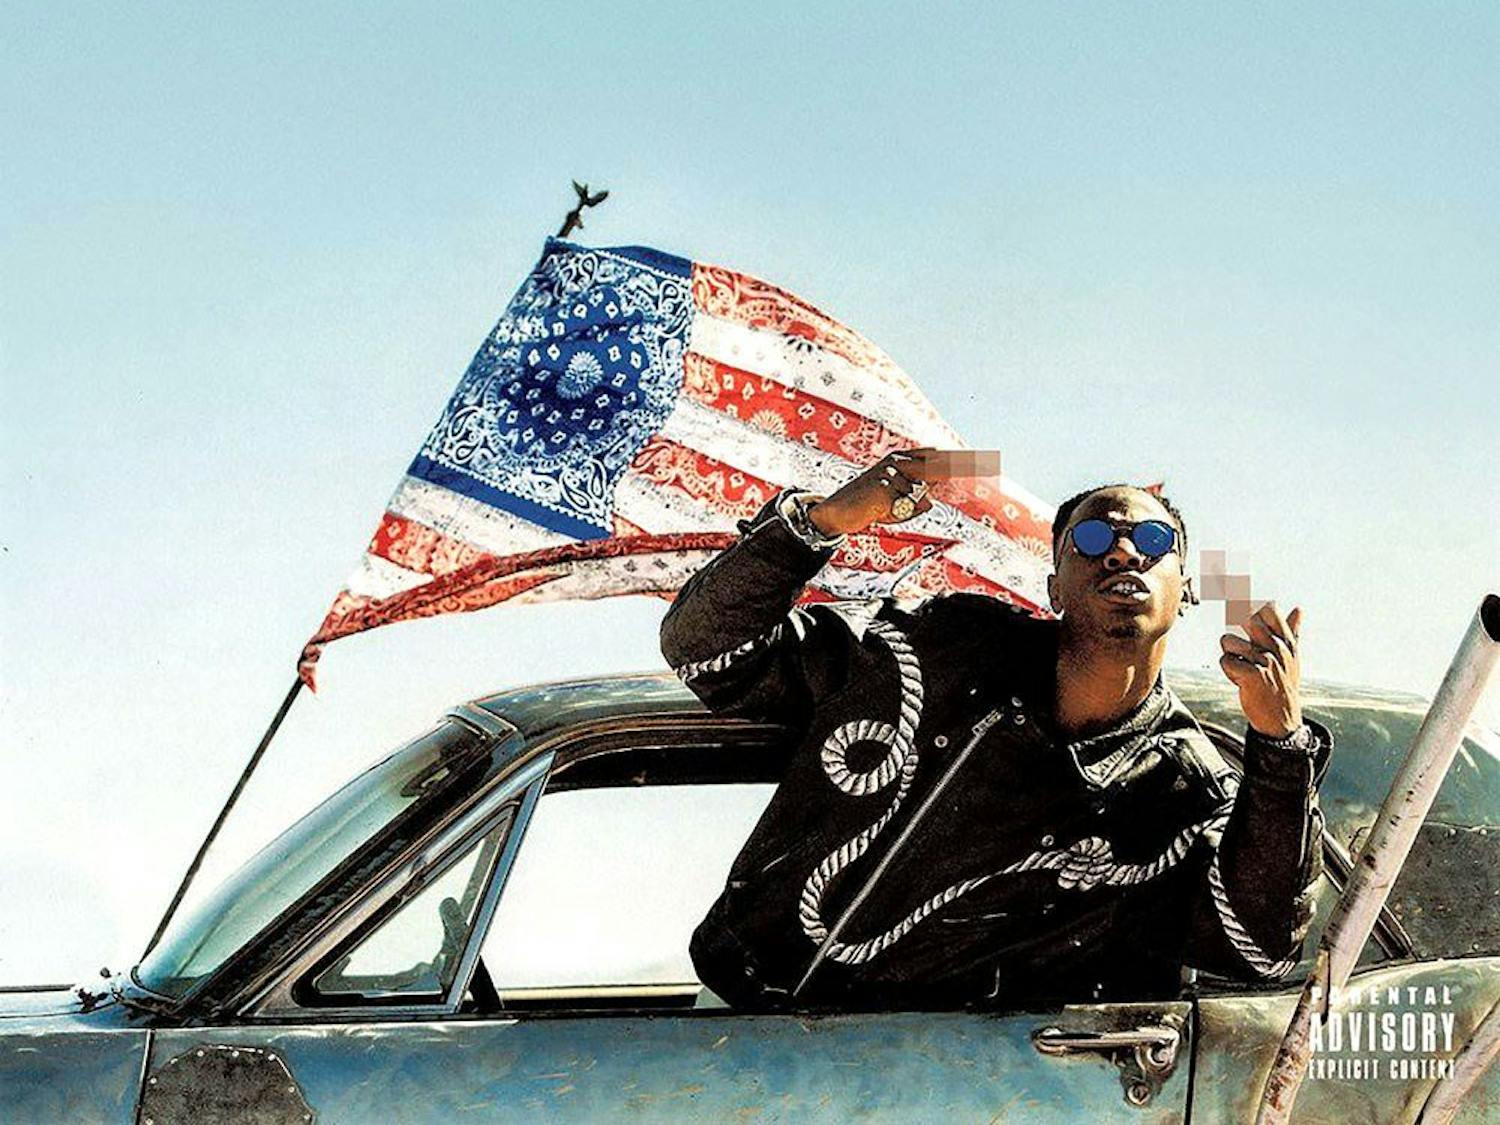 Joey Basa$$’s second studio album All-Amerikkkan Bada$$ released Friday April 7. The album includes features from rappers including Schoolboy Q and J Cole.